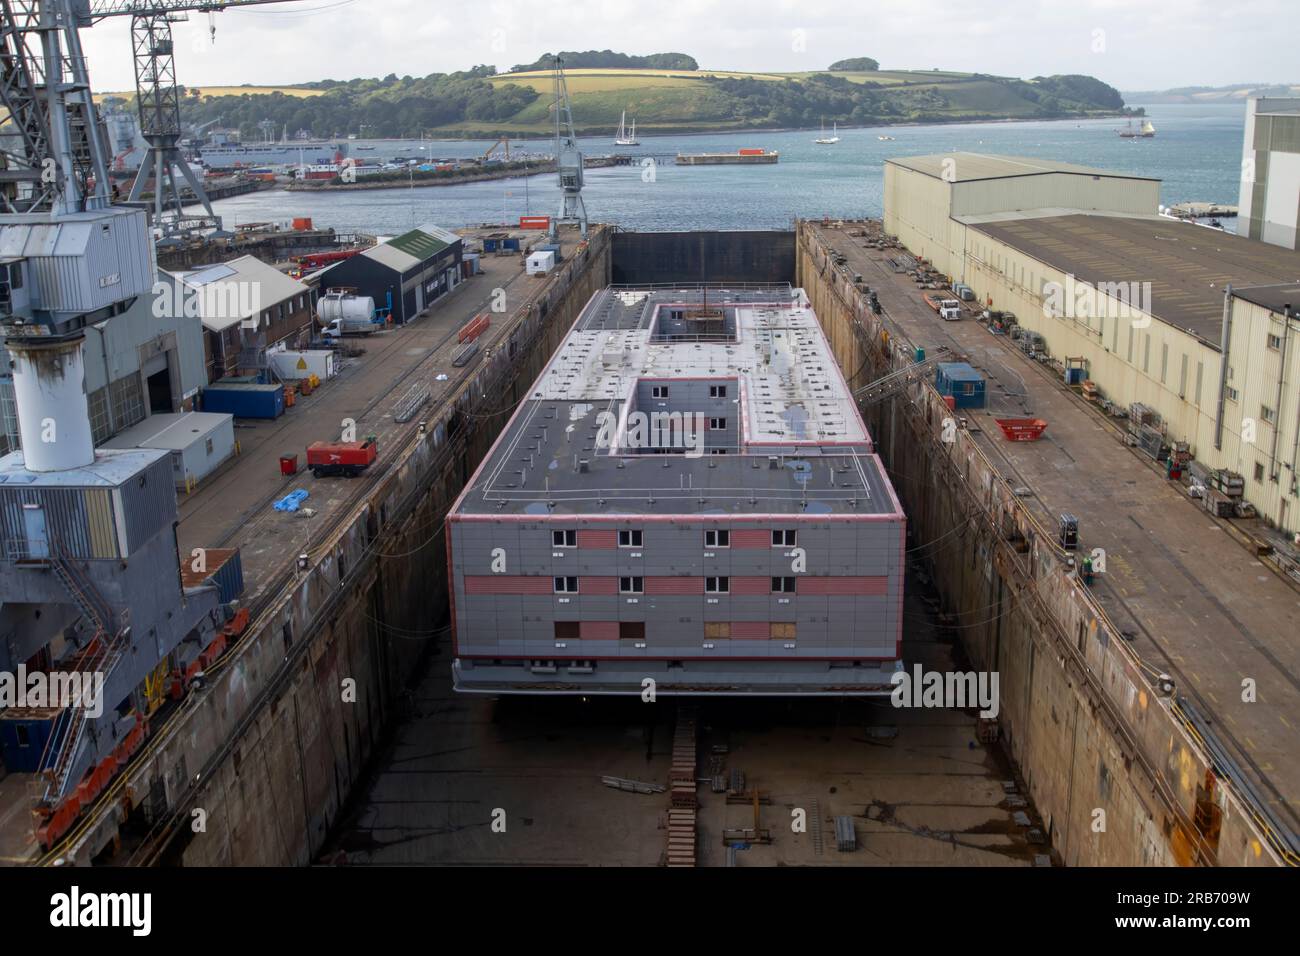 An accommodation barge being renovated in dry dock in Falmouth, Cornwall, UK Stock Photo